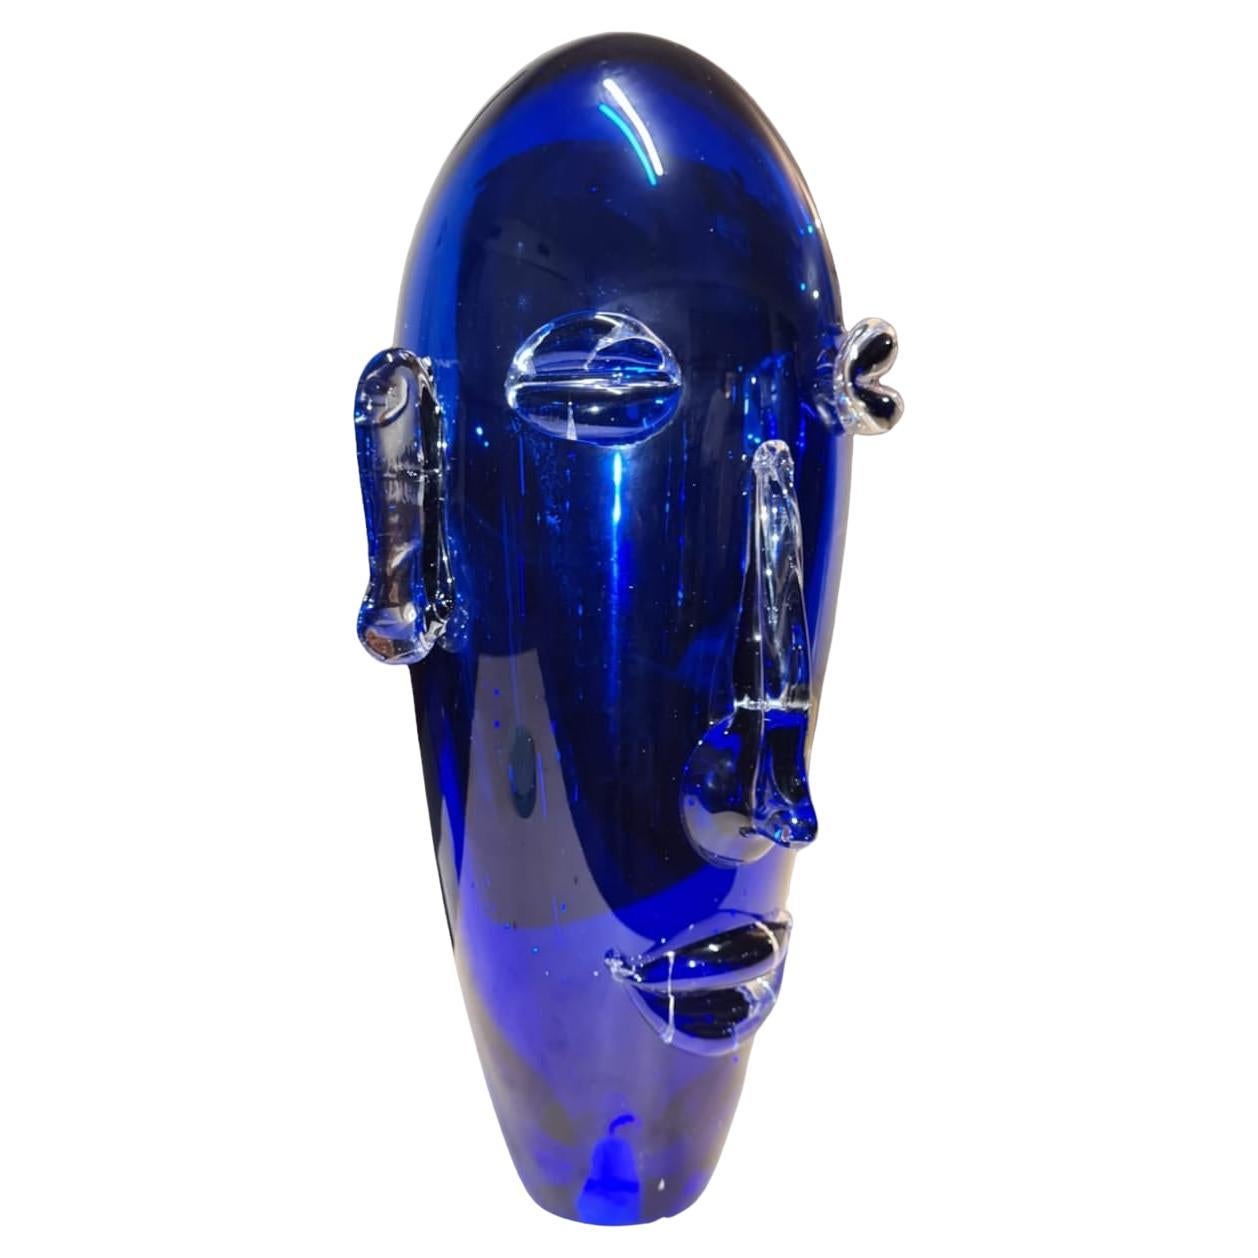 Head sculpture in sapphire blue Murano blown glass, decorative object available For Sale